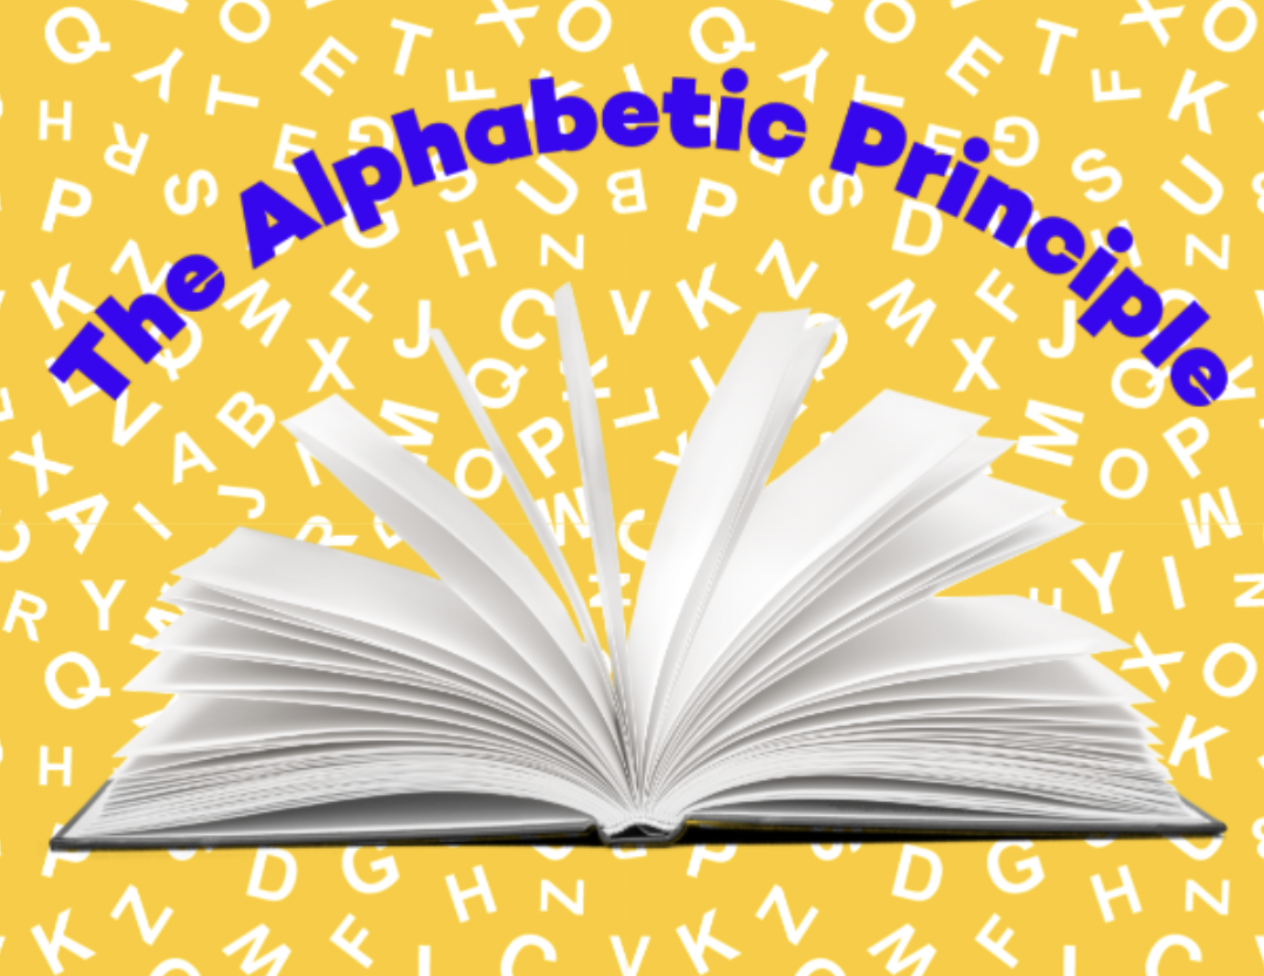 What Is Alphabetic Writing